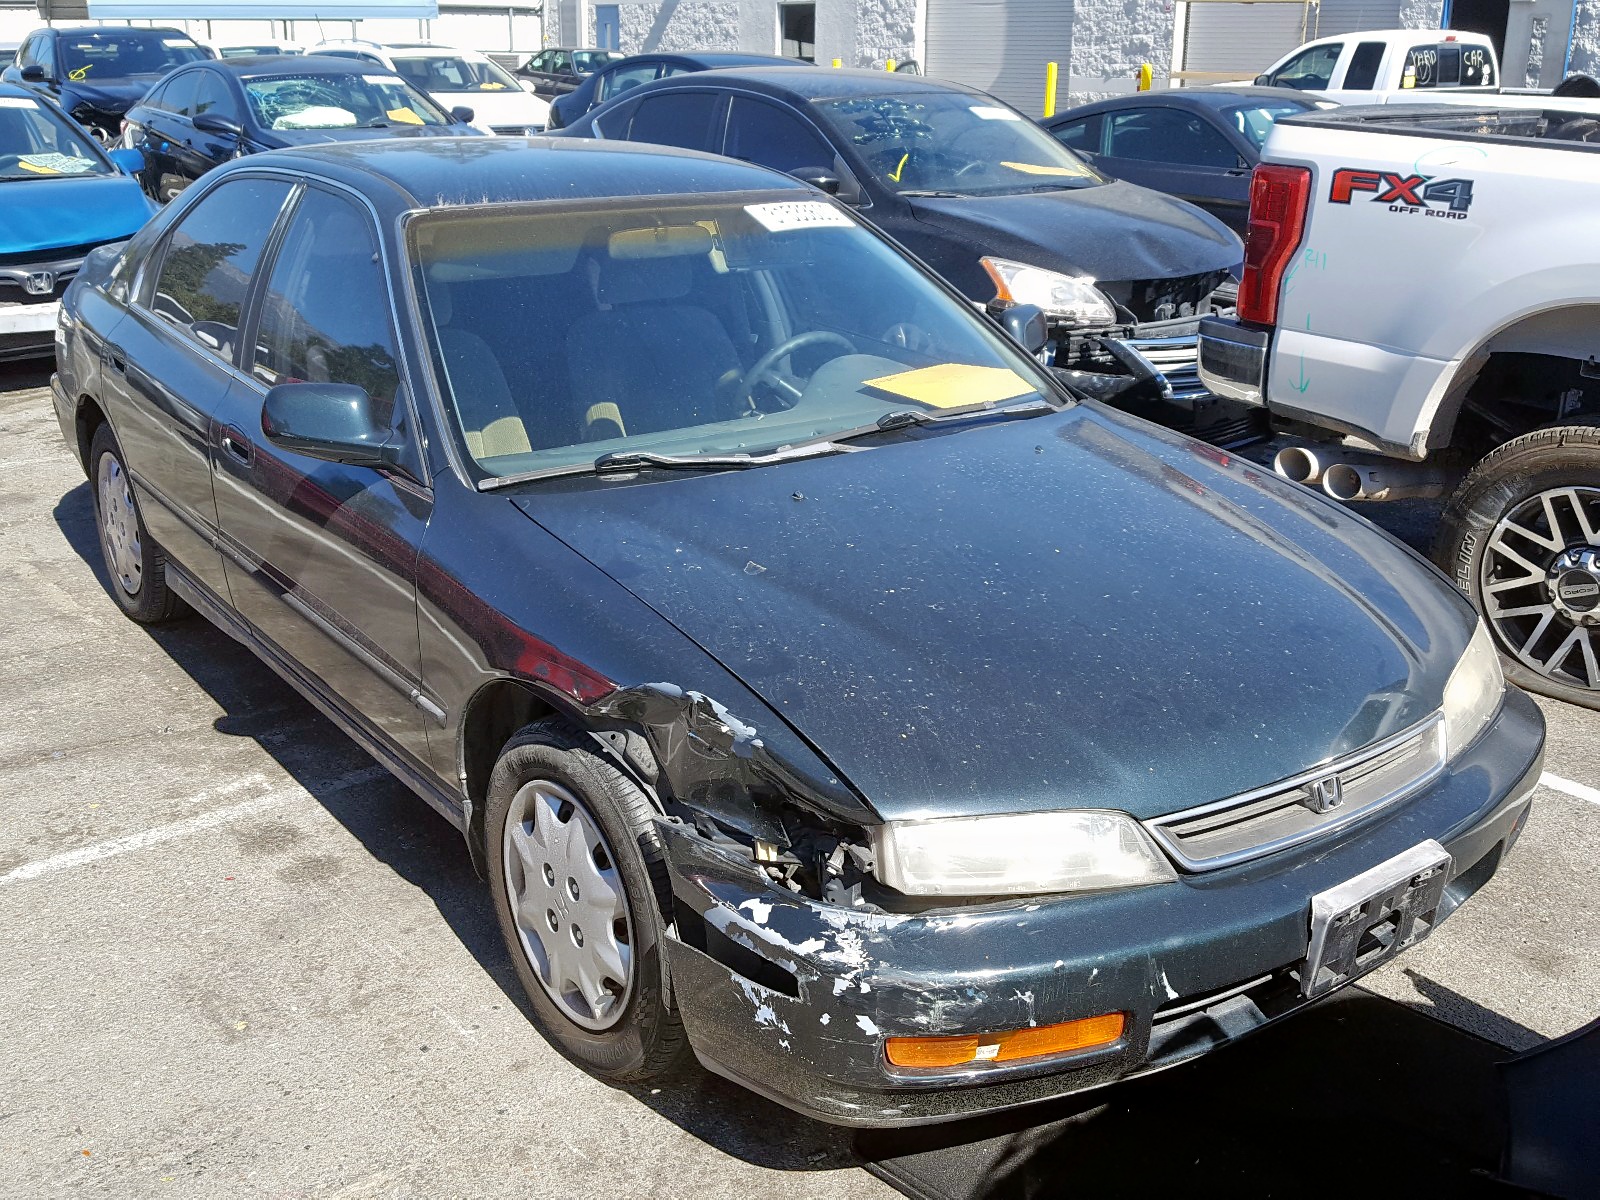 1996 Honda Accord LX for sale at Copart San Diego, CA Lot